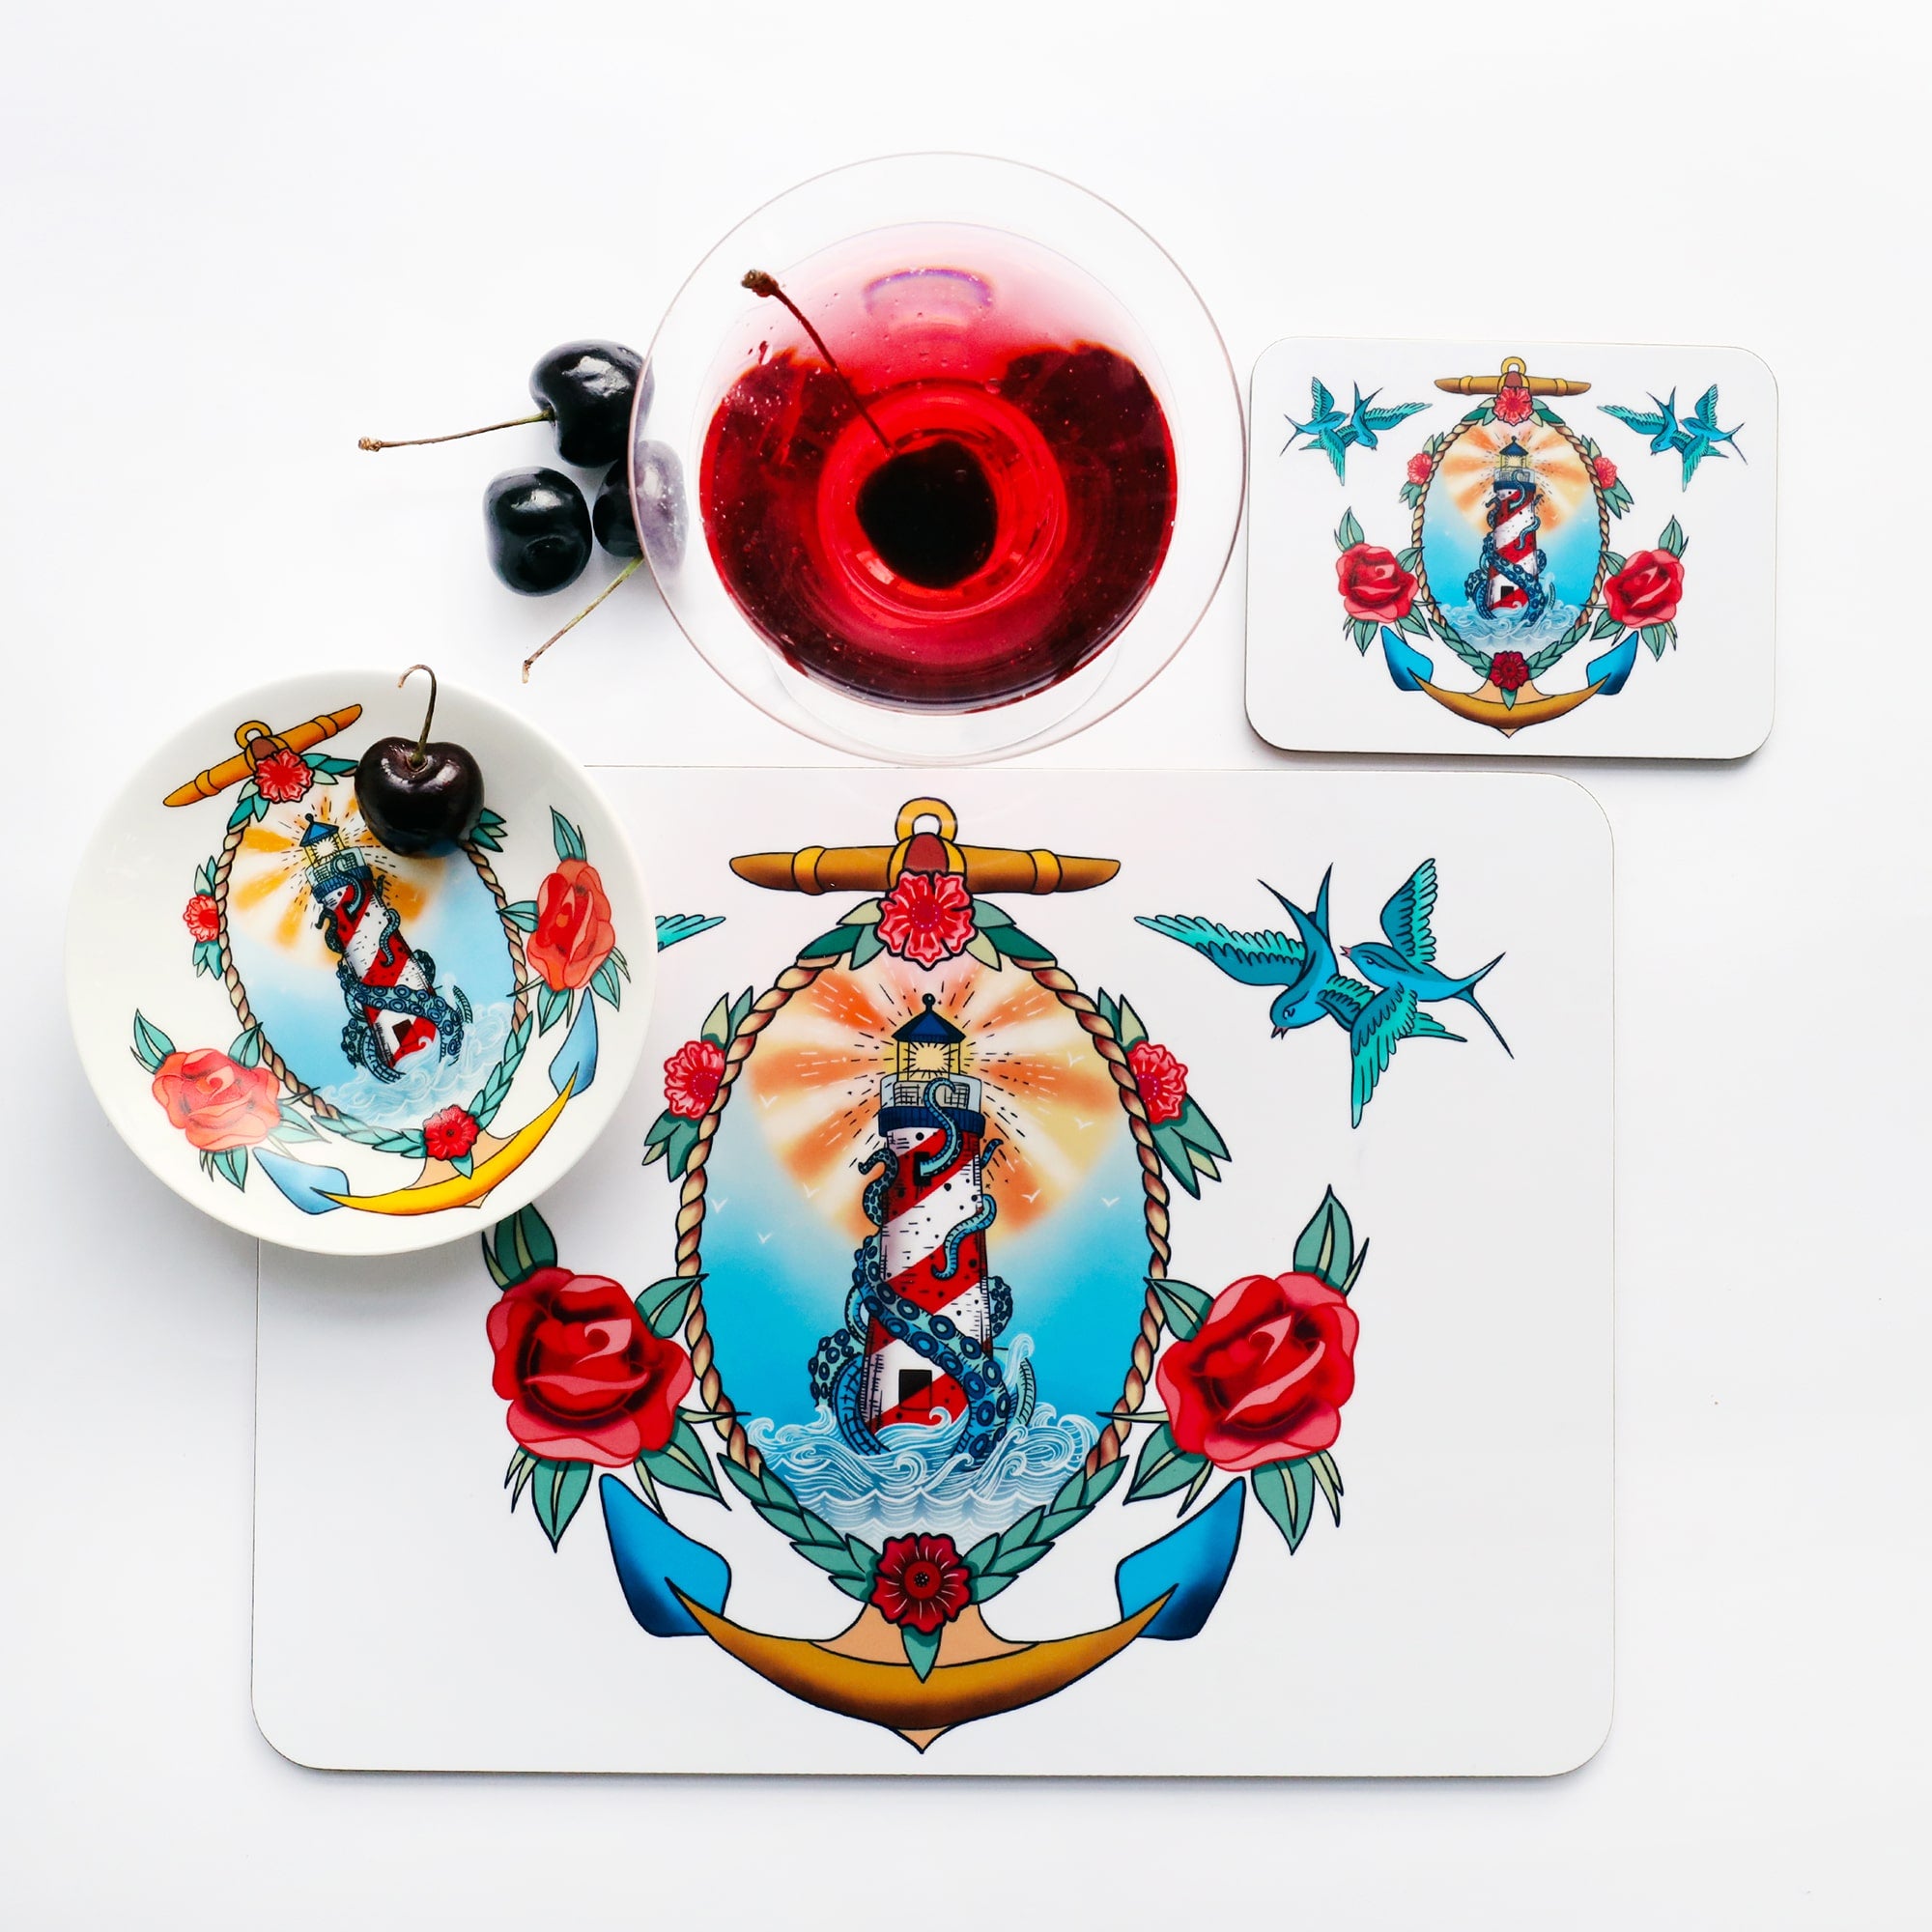 Placemat, coaster and nibbles dish all with the same design of red and white lighthouse with kraken, sitting in a rope, anchor and rose surround. This is laid out like a place setting with a cocktail glass filled with a red drink. There is a cherry in the glass along with 3 cherries sitting to the side.